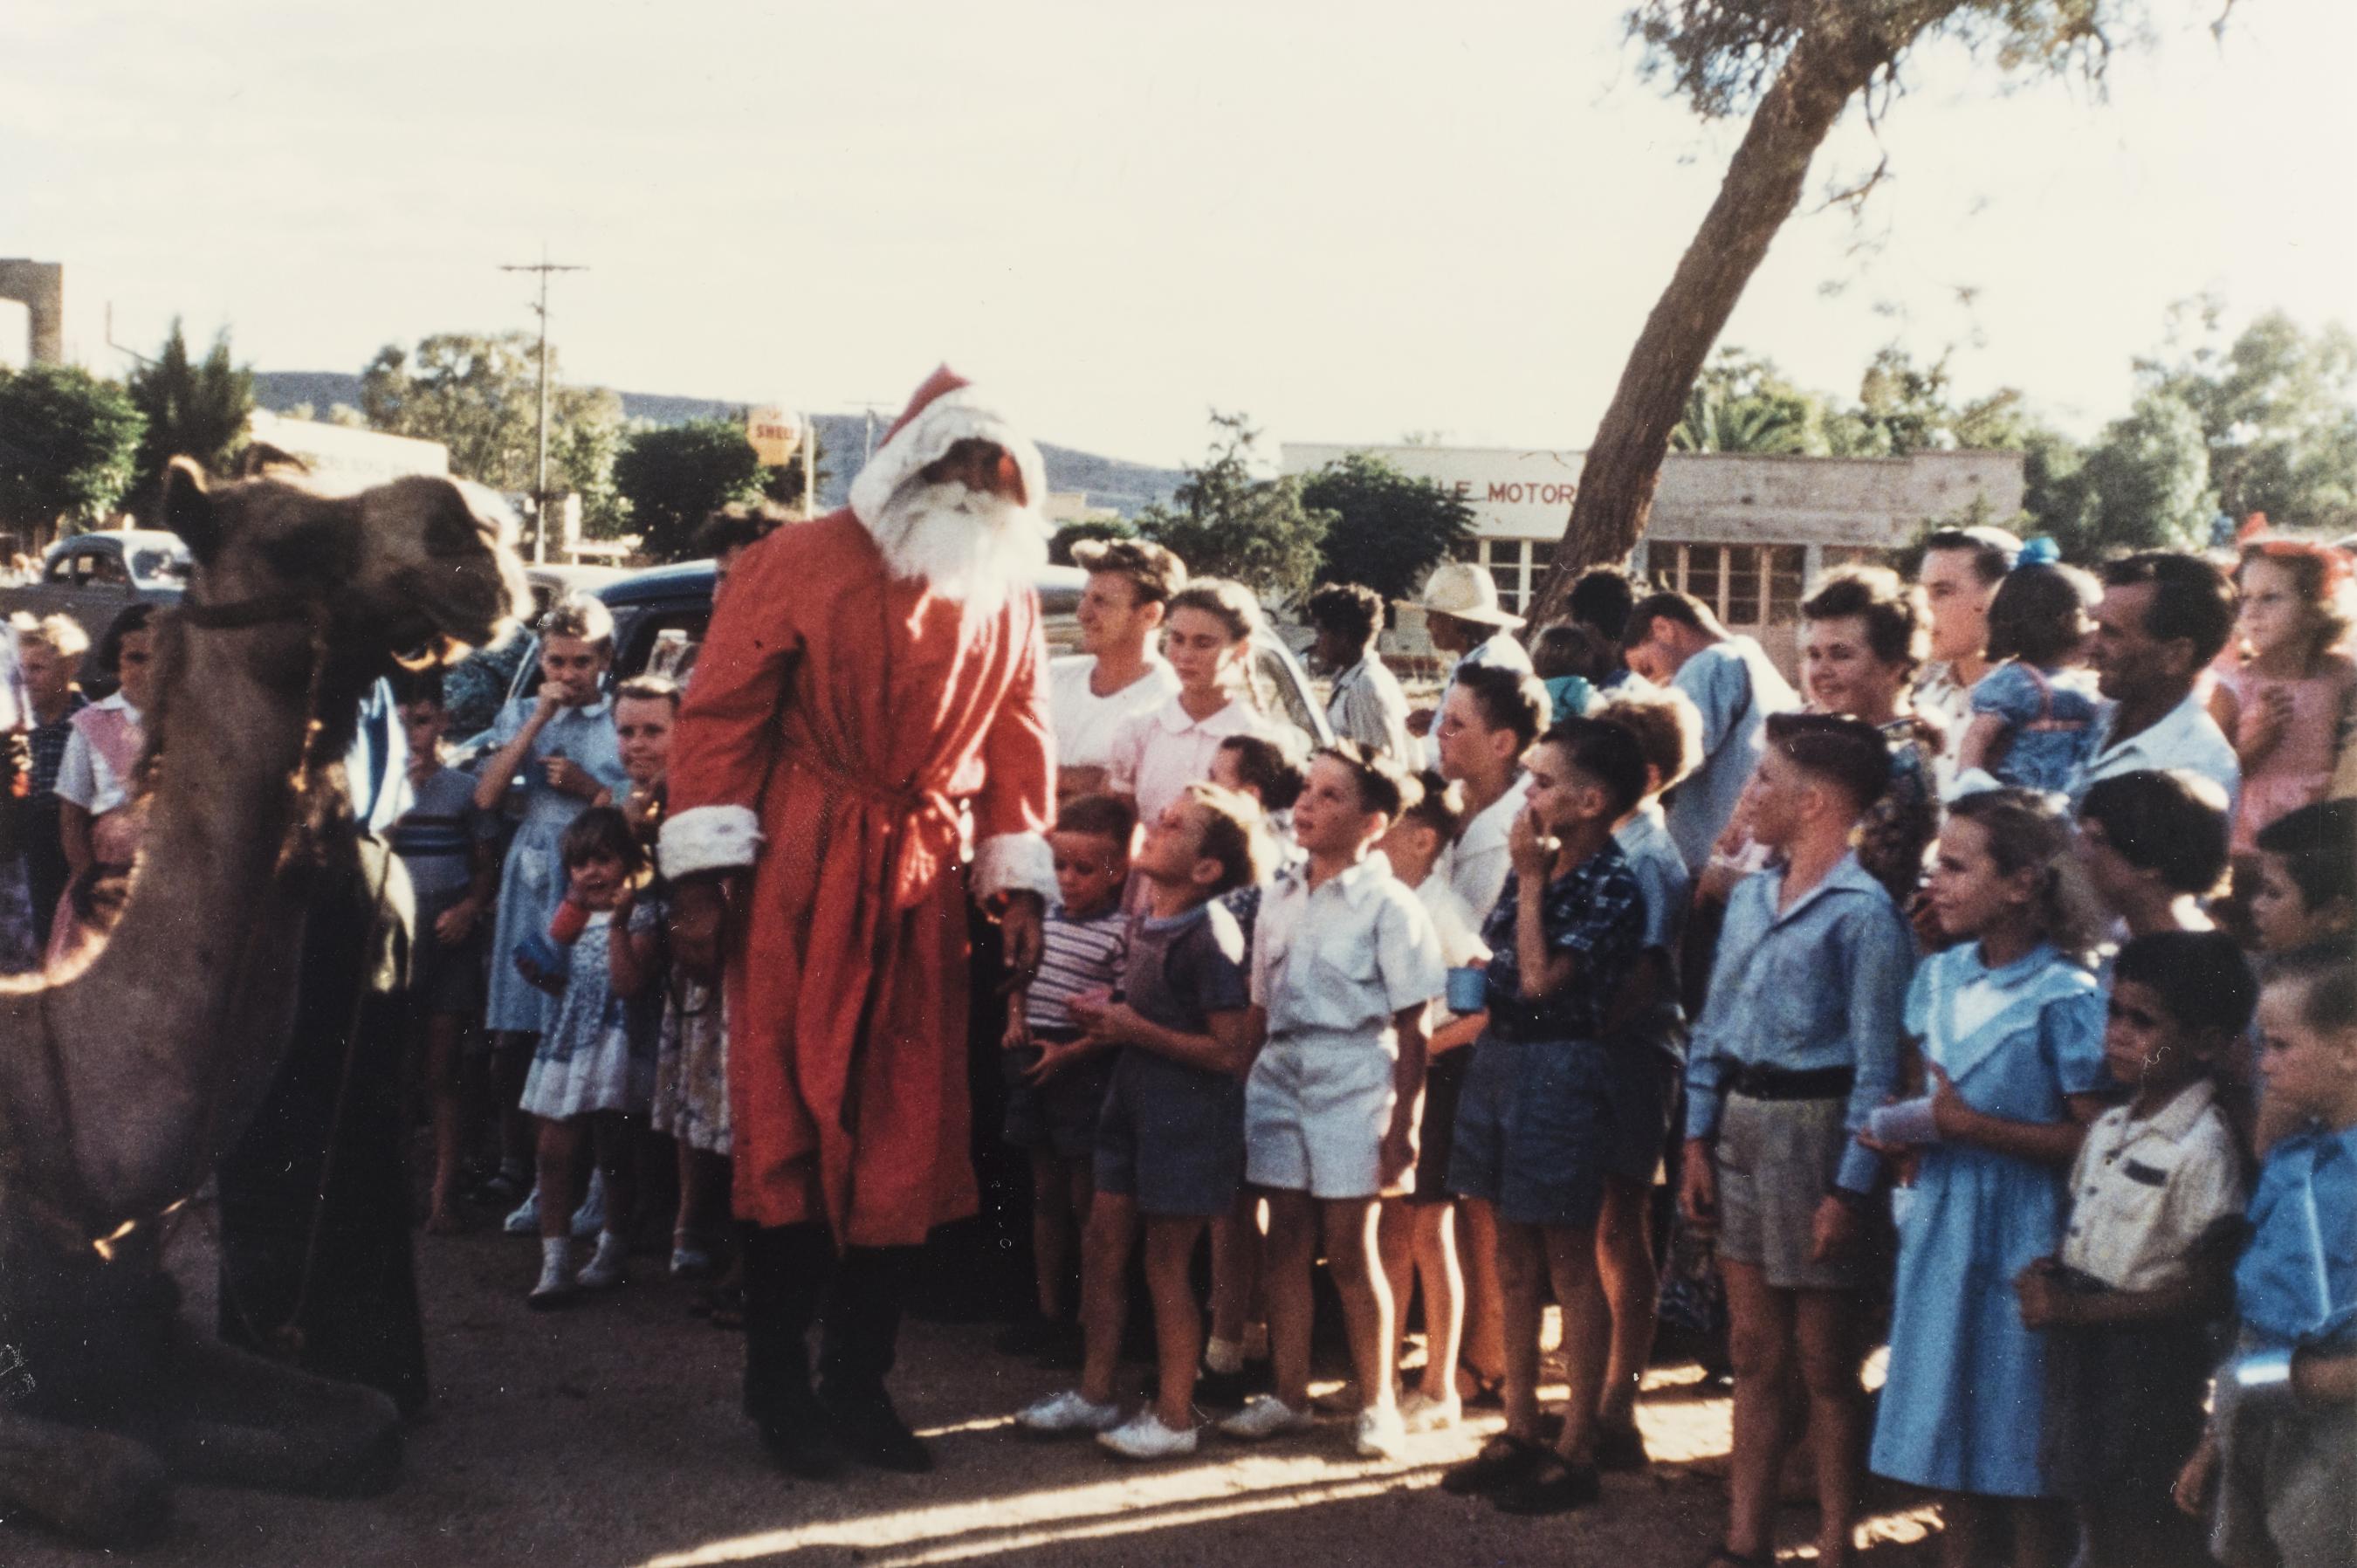 A large group of children gather around Father Christmas. A Camel is seen in the left of the frame. 